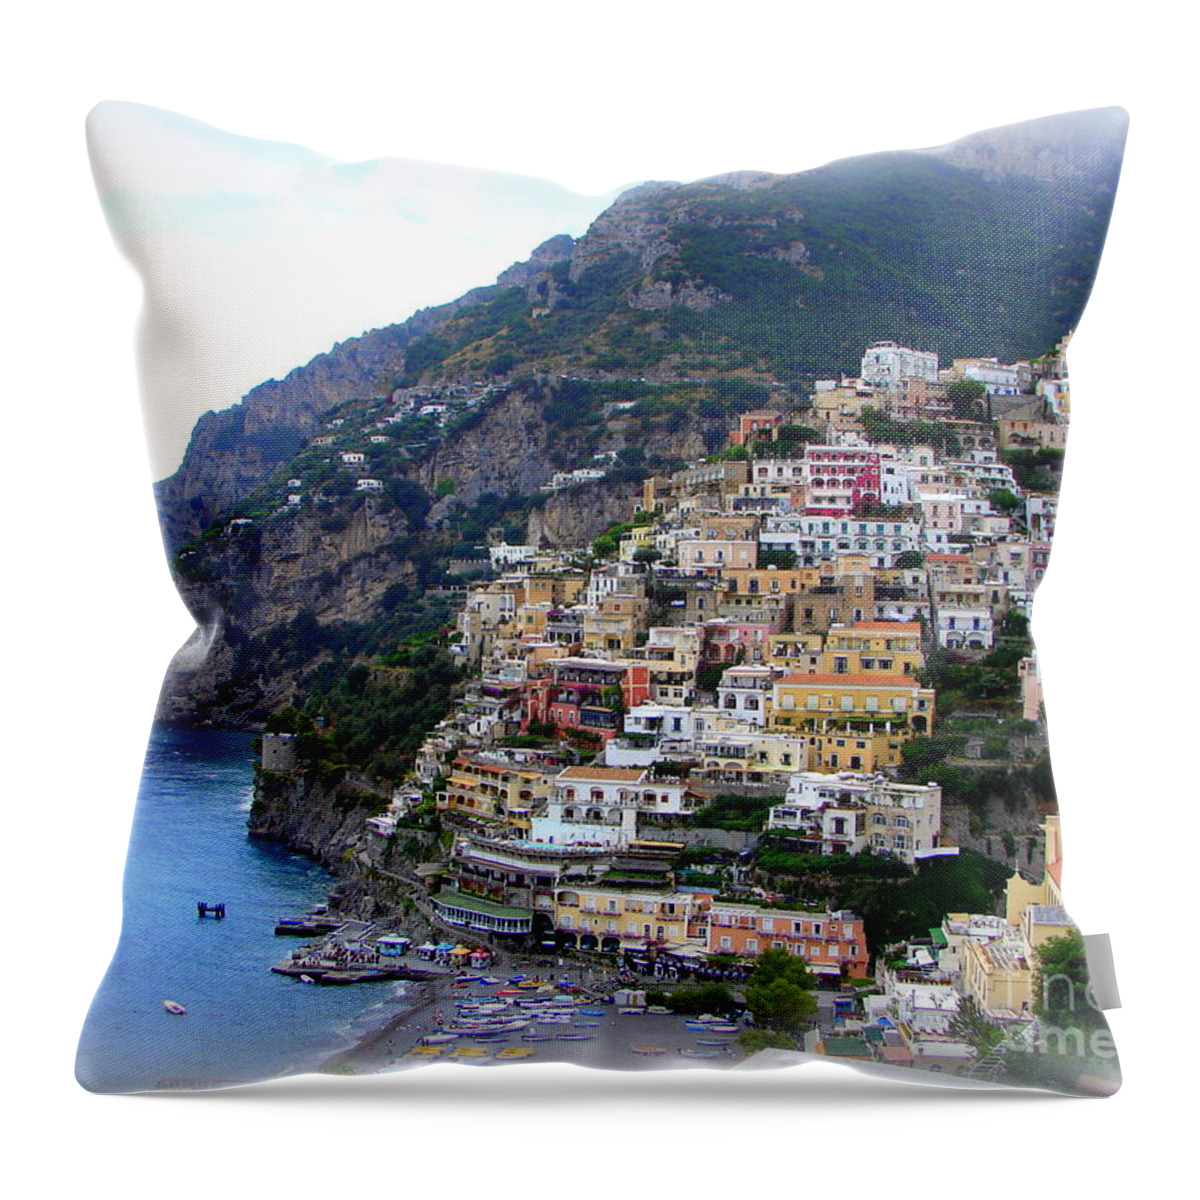 Italy Throw Pillow featuring the photograph Positano Italy by Patrick Witz